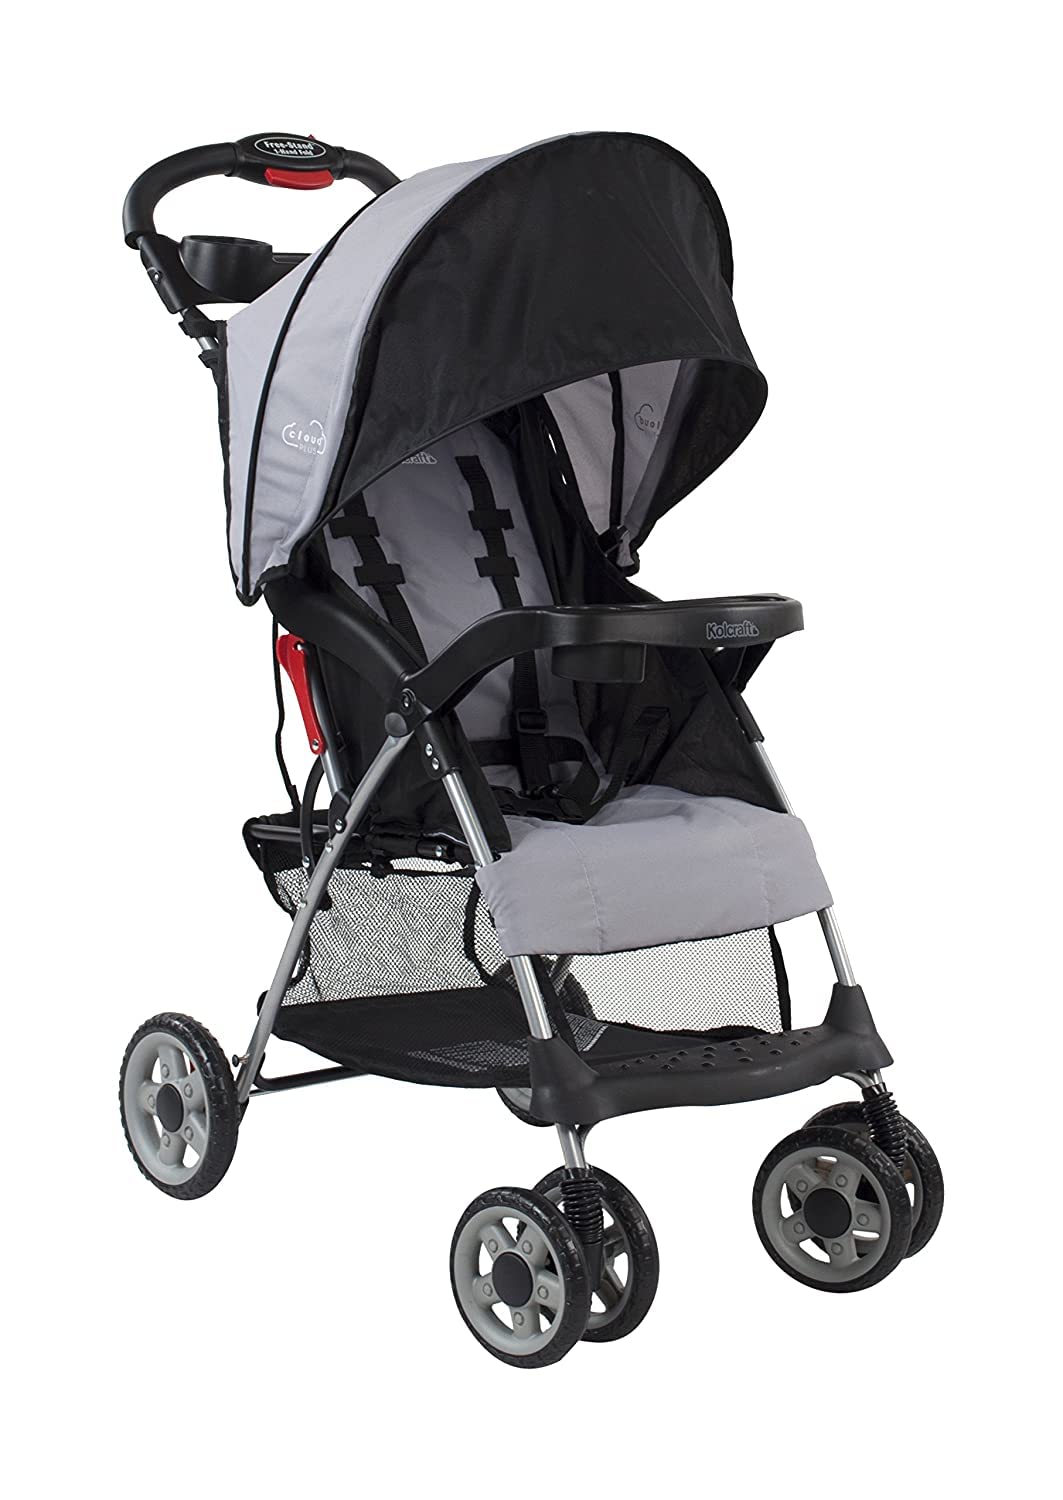 Kolcraft Cloud Plus Lightweight Easy Fold Compact Toddler Stroller and Baby Stroller for Travel, Large Storage Basket, Multi-Position Recline, Convenient One-hand Fold, 13 lbs - Slate Gray